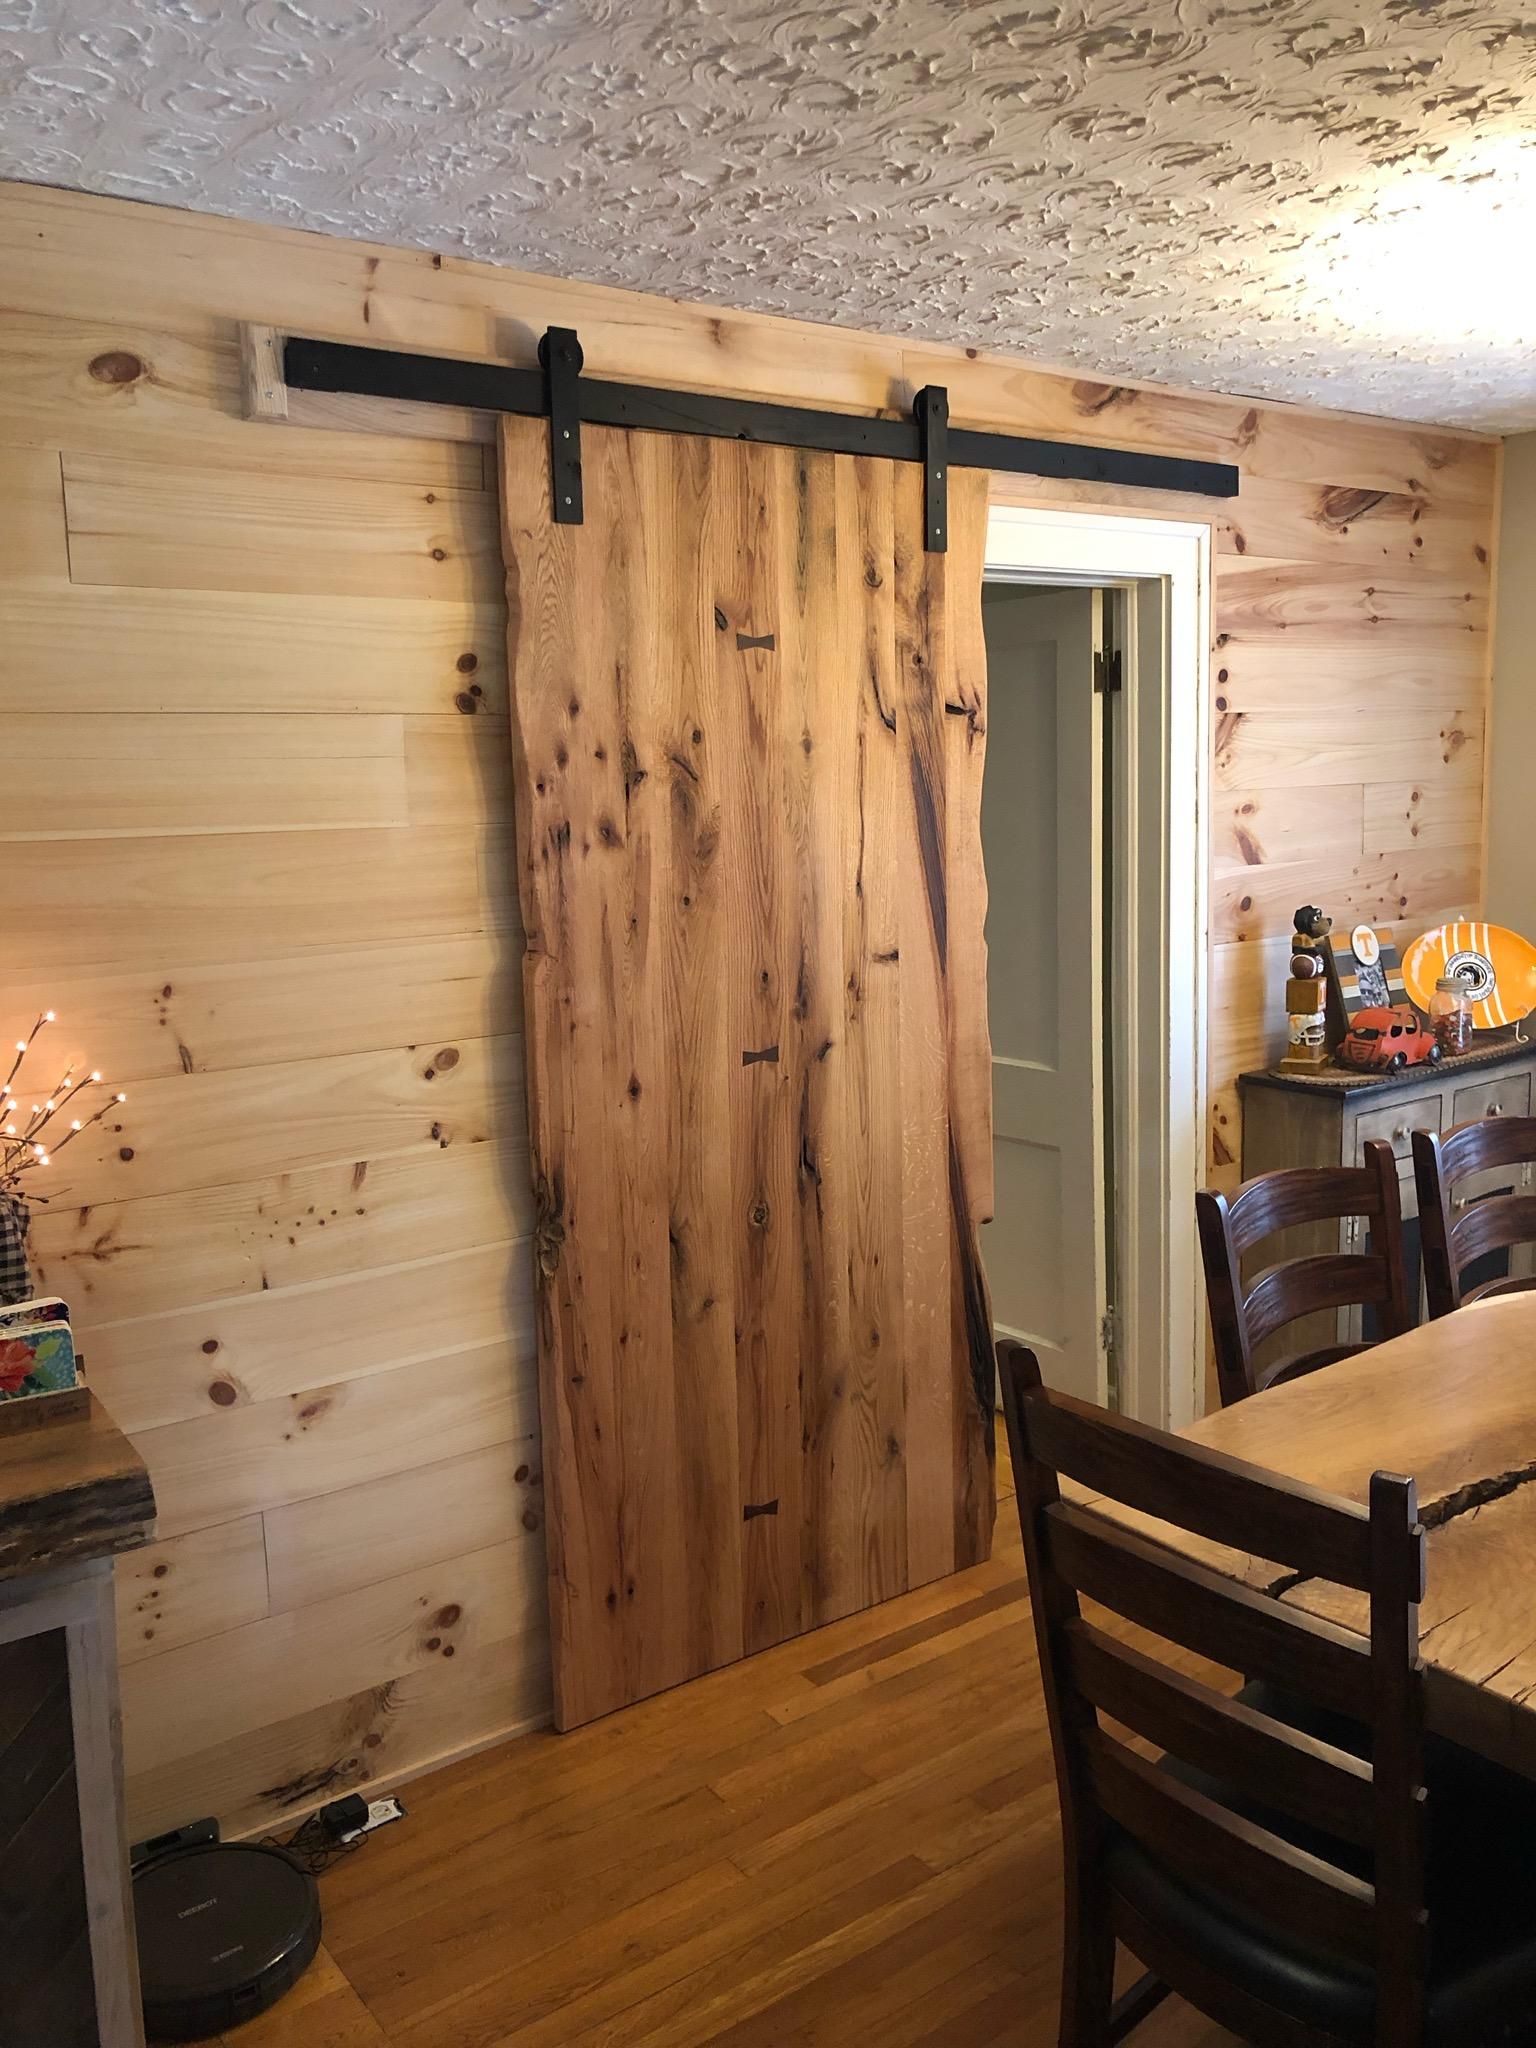 Buy Hand Made Live Edge Oak Barn Door, made to order from Timbers